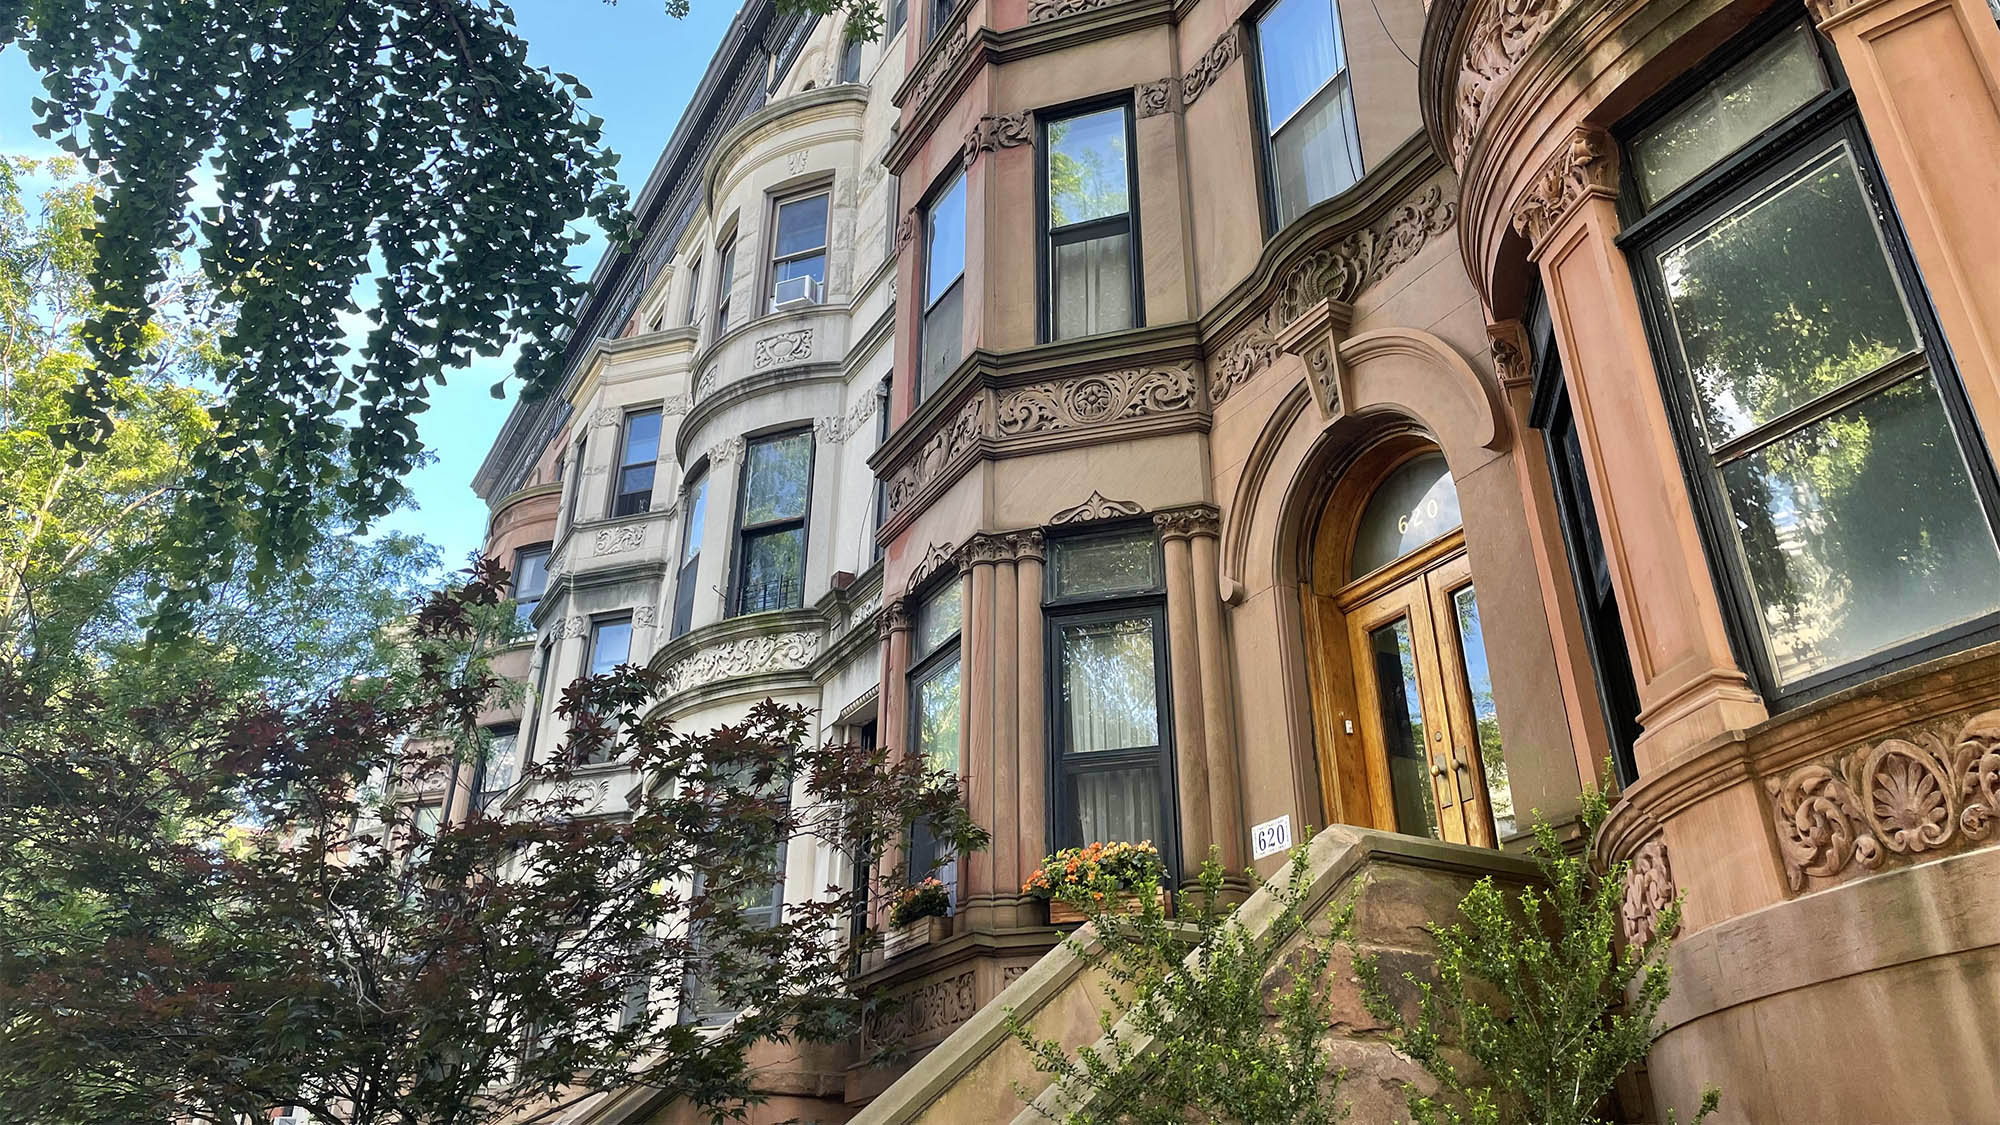 Row of Brooklyn brownstone buildings with trees and blue sky